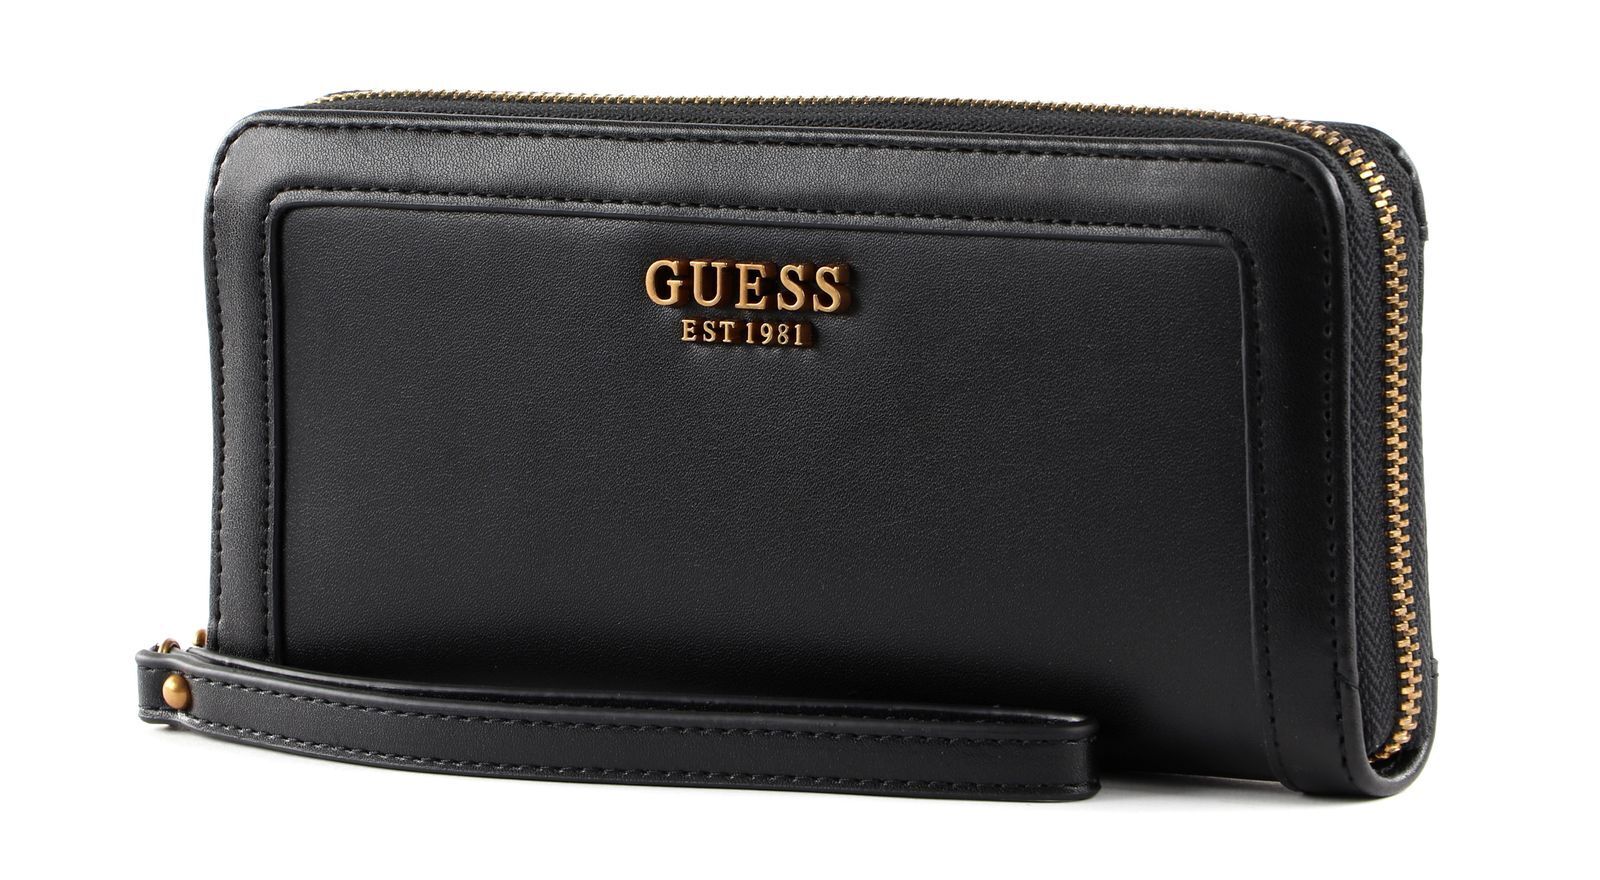 Guess ABEY SLG LARGE ZIP AROUND